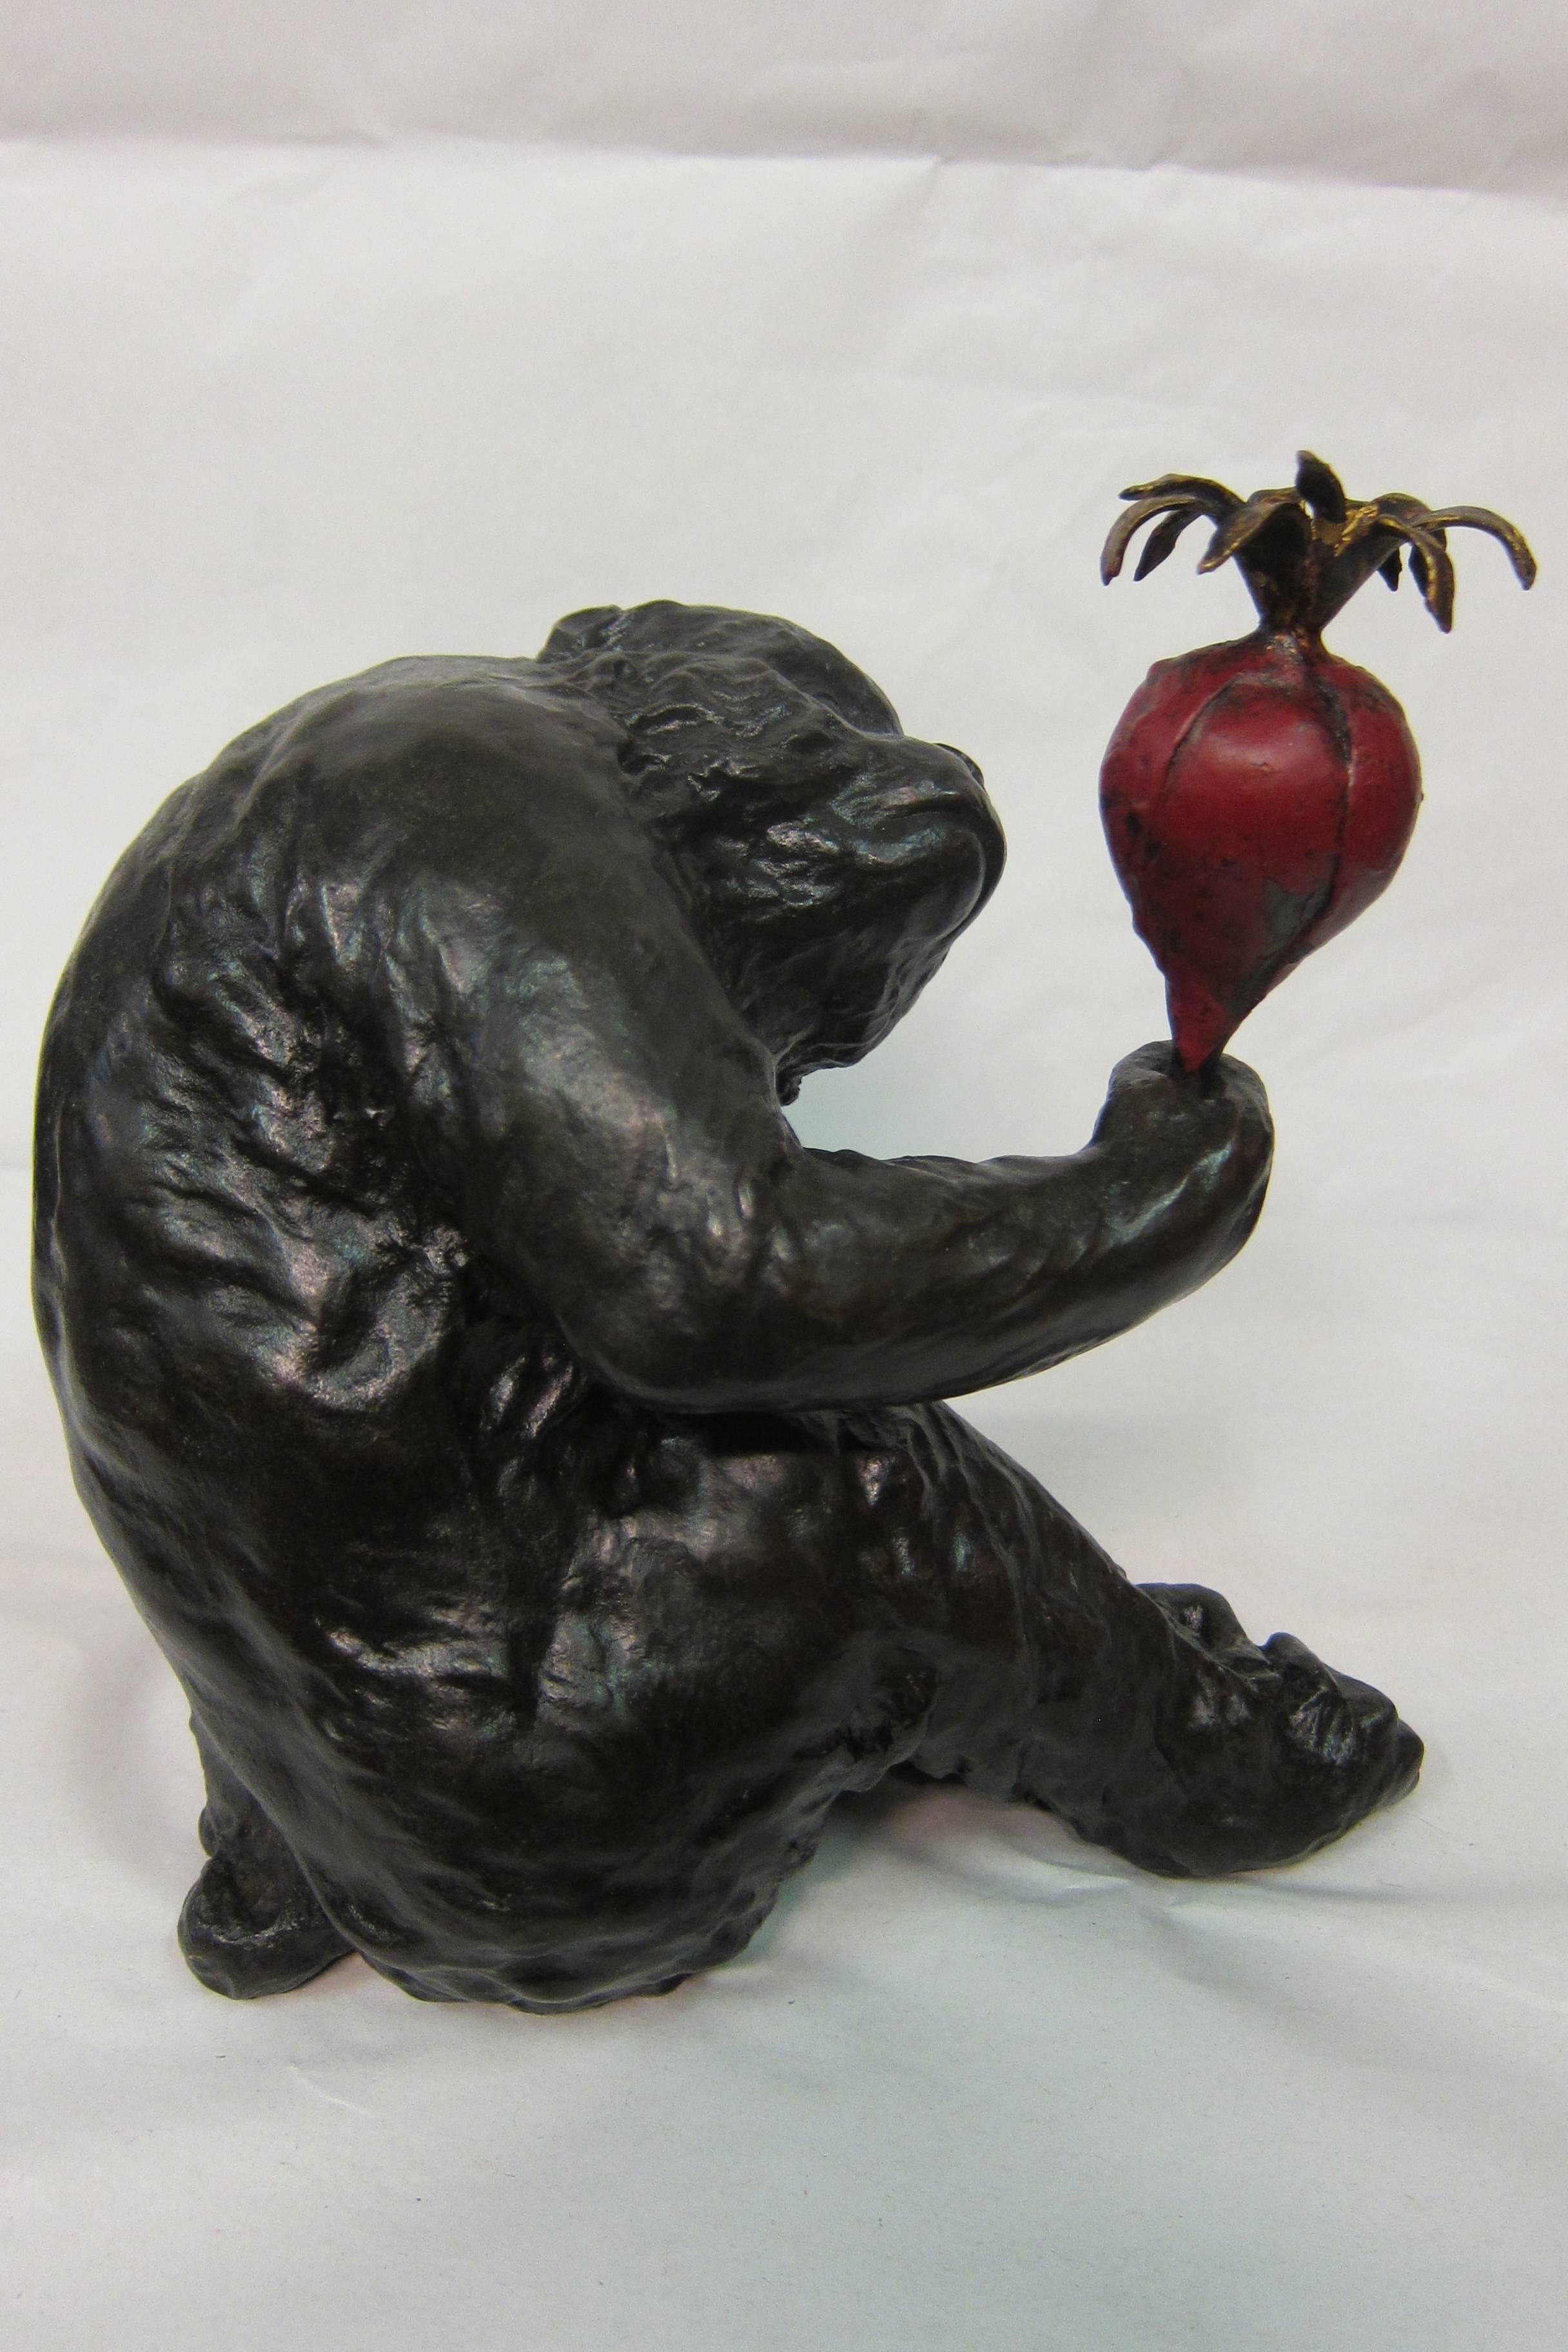 A vintage early 20th century Japanese bronze of a curious ape contemplating whether or not to eat his turnip. The detailed rendering of the ape's anatomy is magnificent & the execution of the primate's facial expression of bewilderment has no equal!